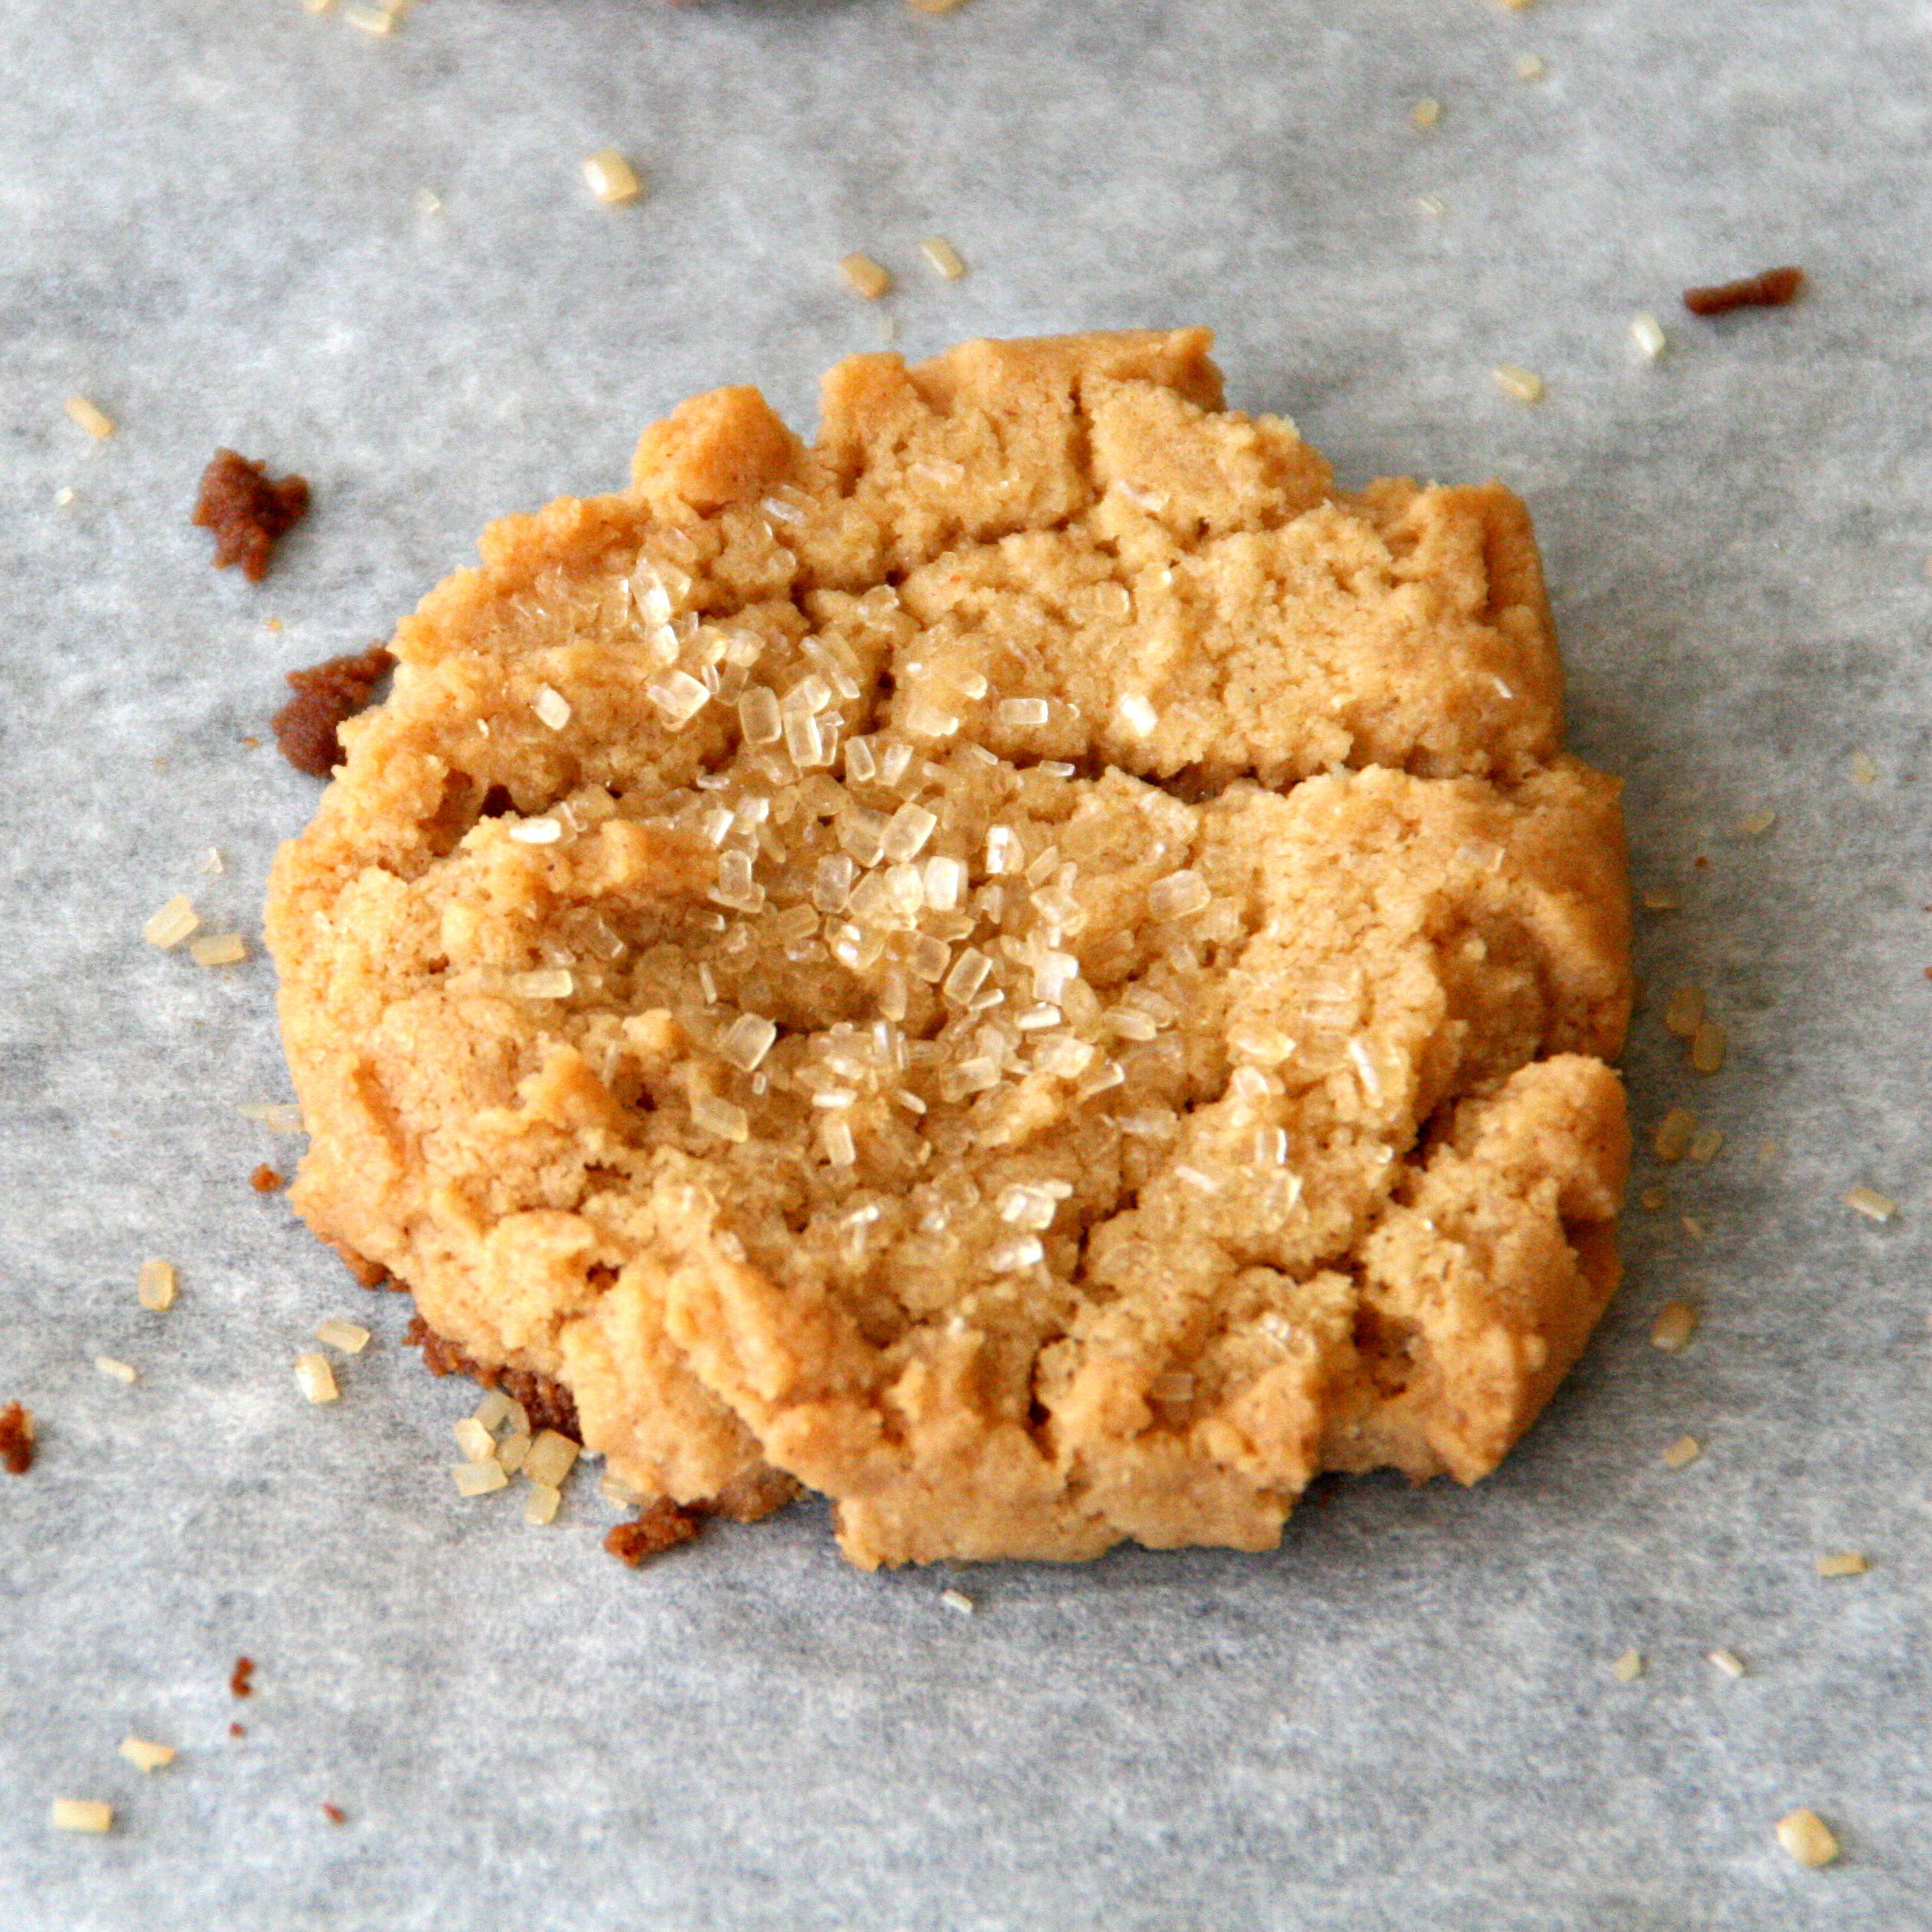 Coarse sugar crystals decorates the top of a peanut butter cookie